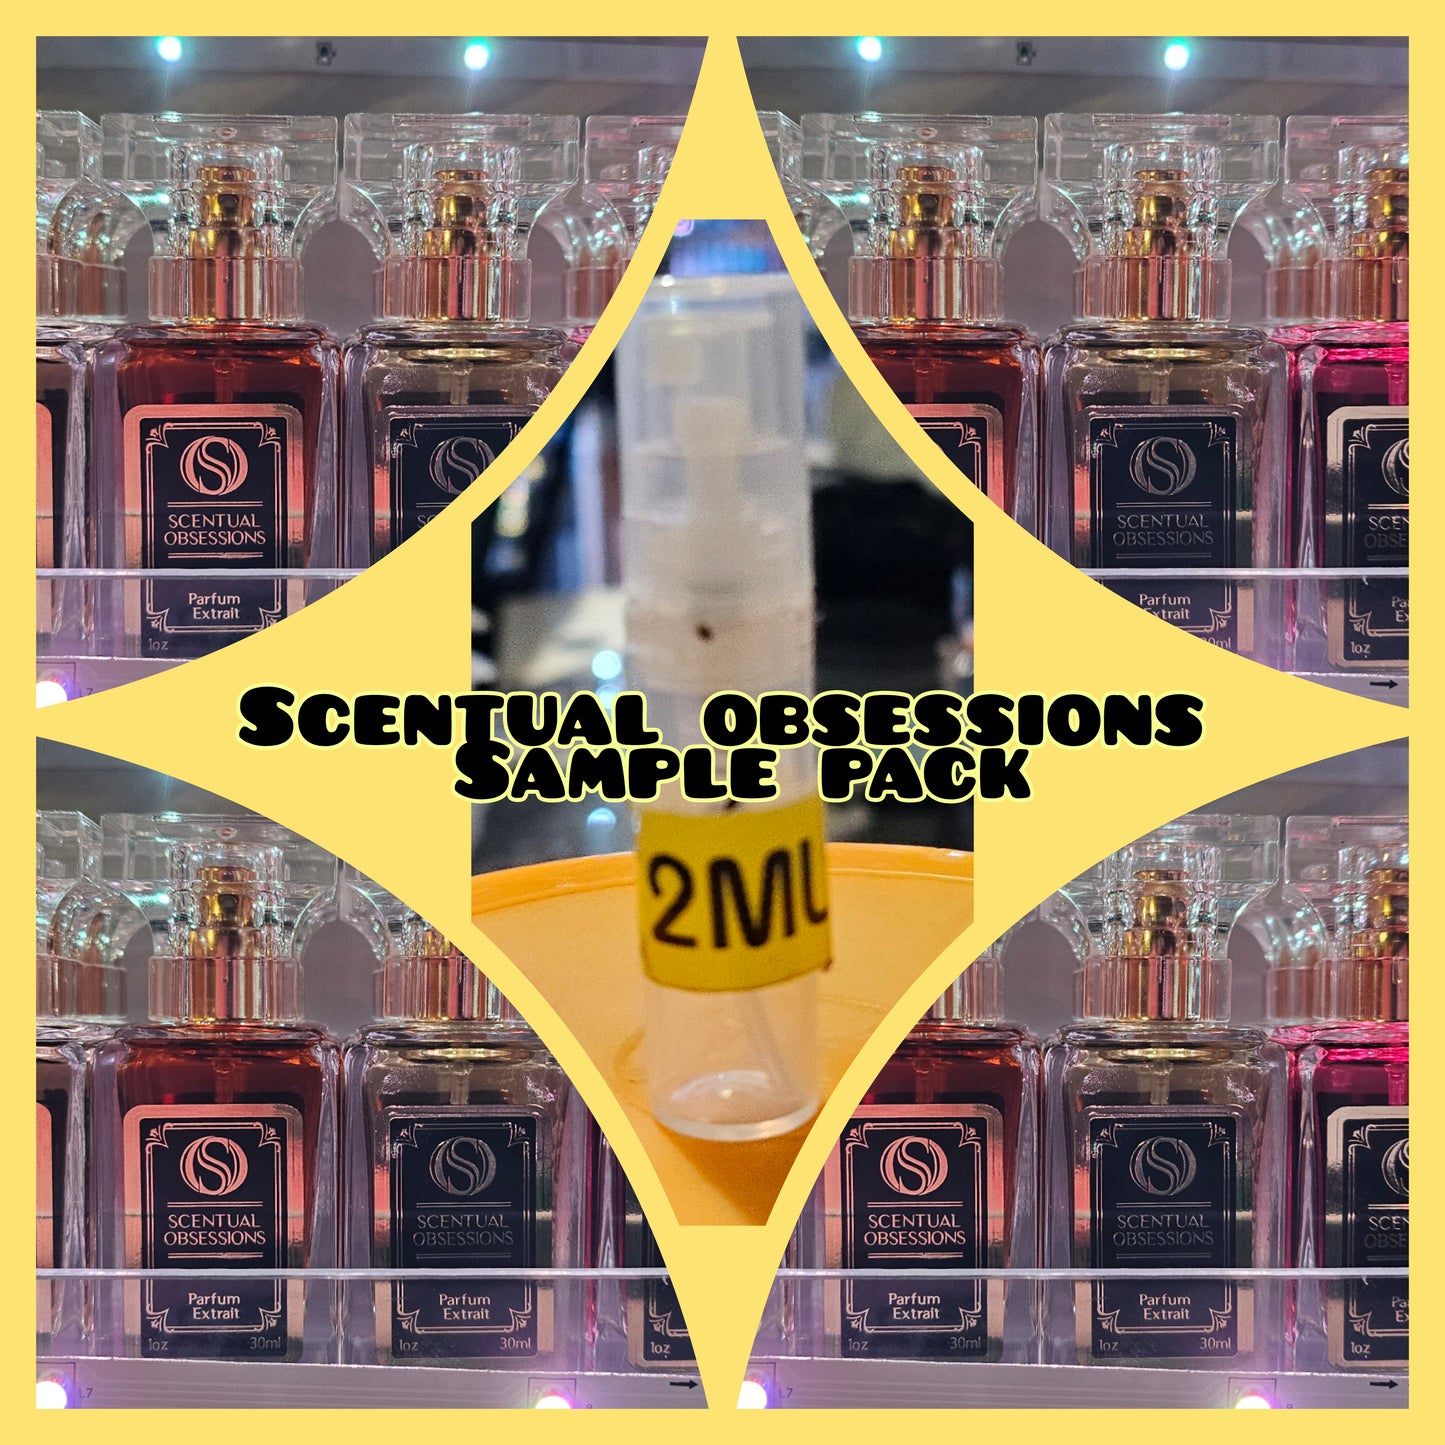 Scentual Obsessions Sample Packs 2ml